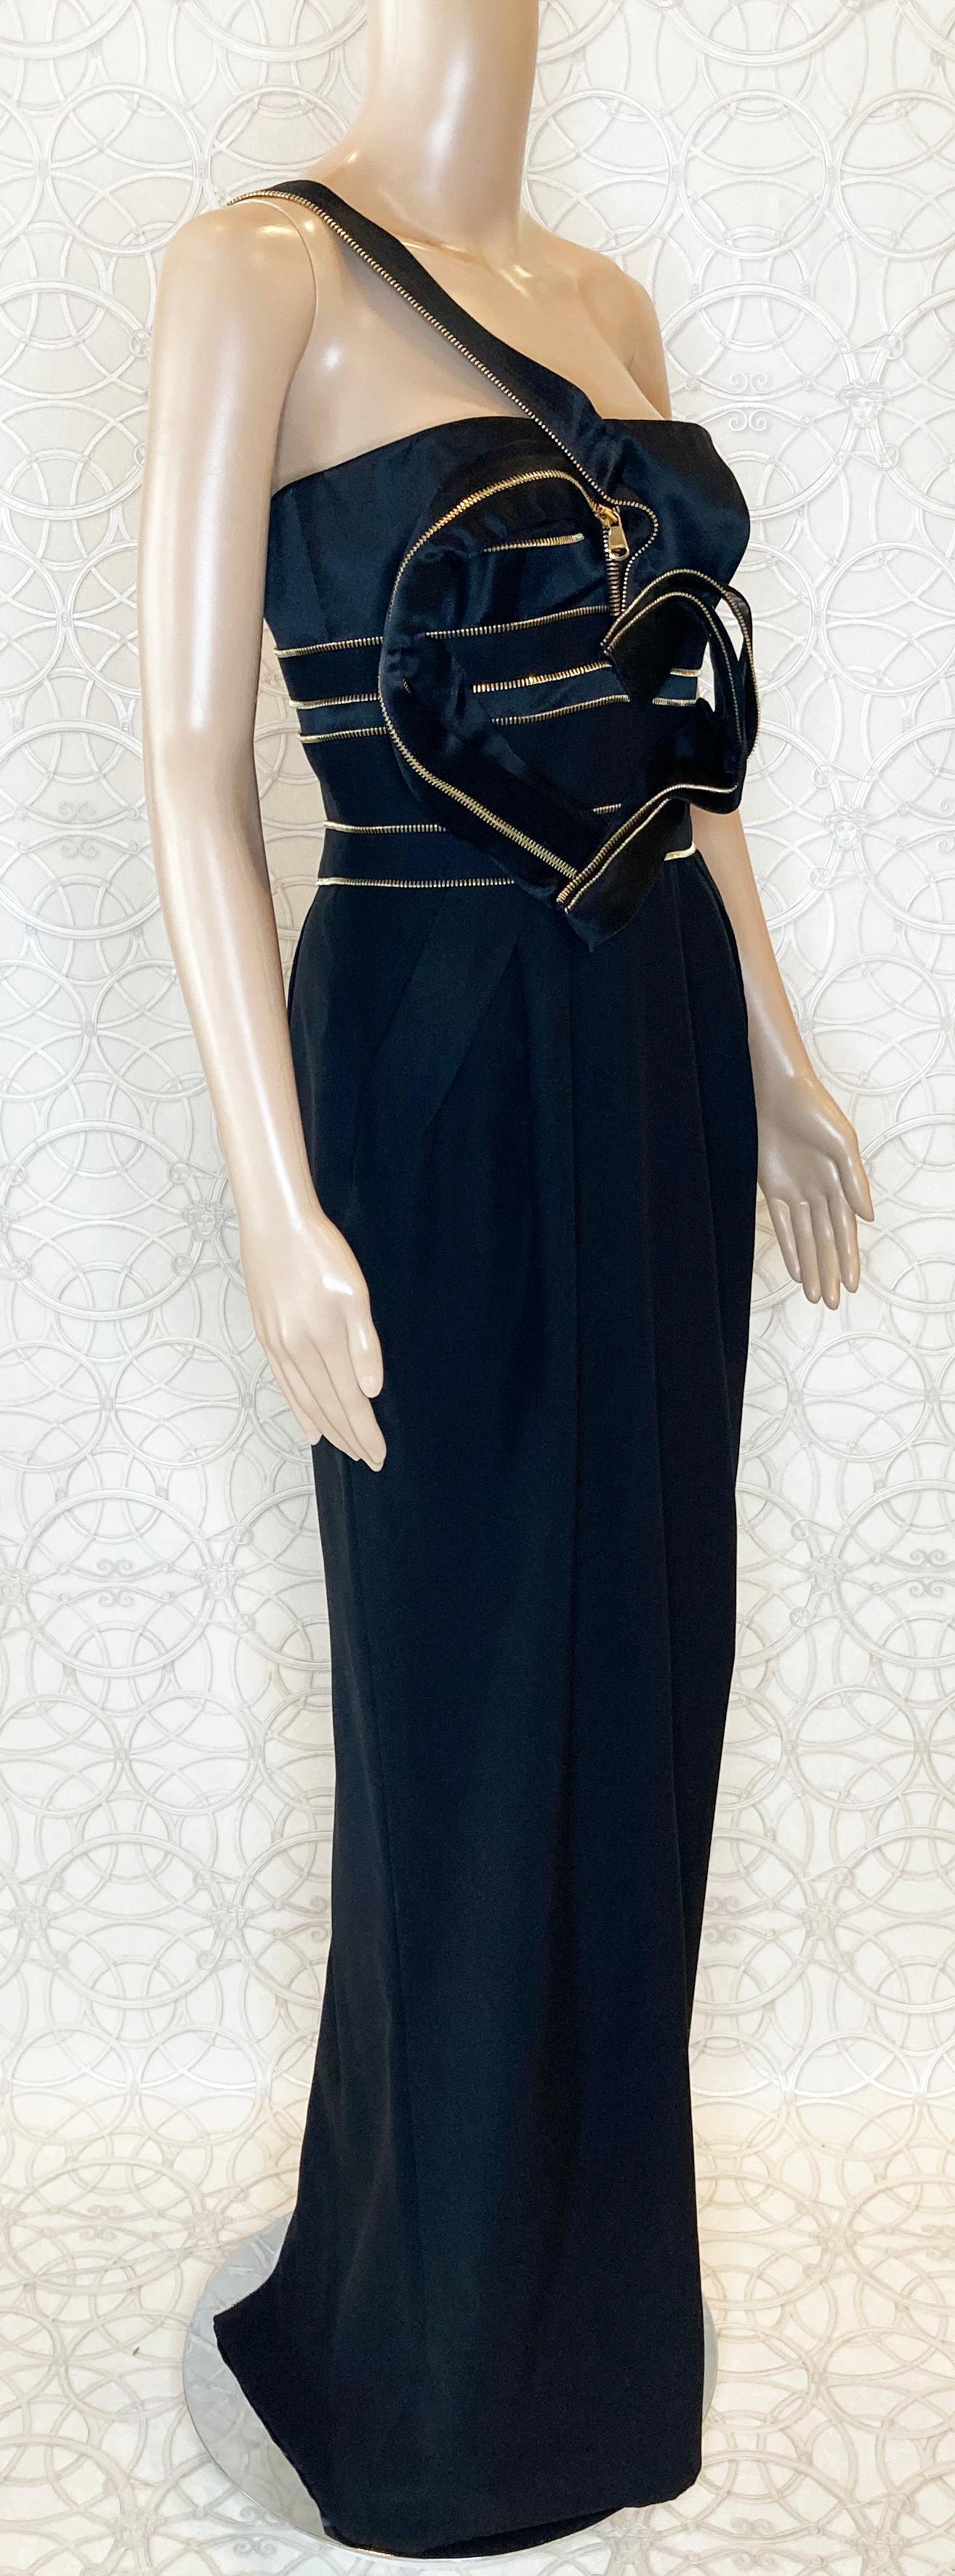 S/2009 L# 30 VERSACE ONE SHOULDER BLACK SILK LONG DRESS GOWN With HEART 42 - 6 For Sale 5